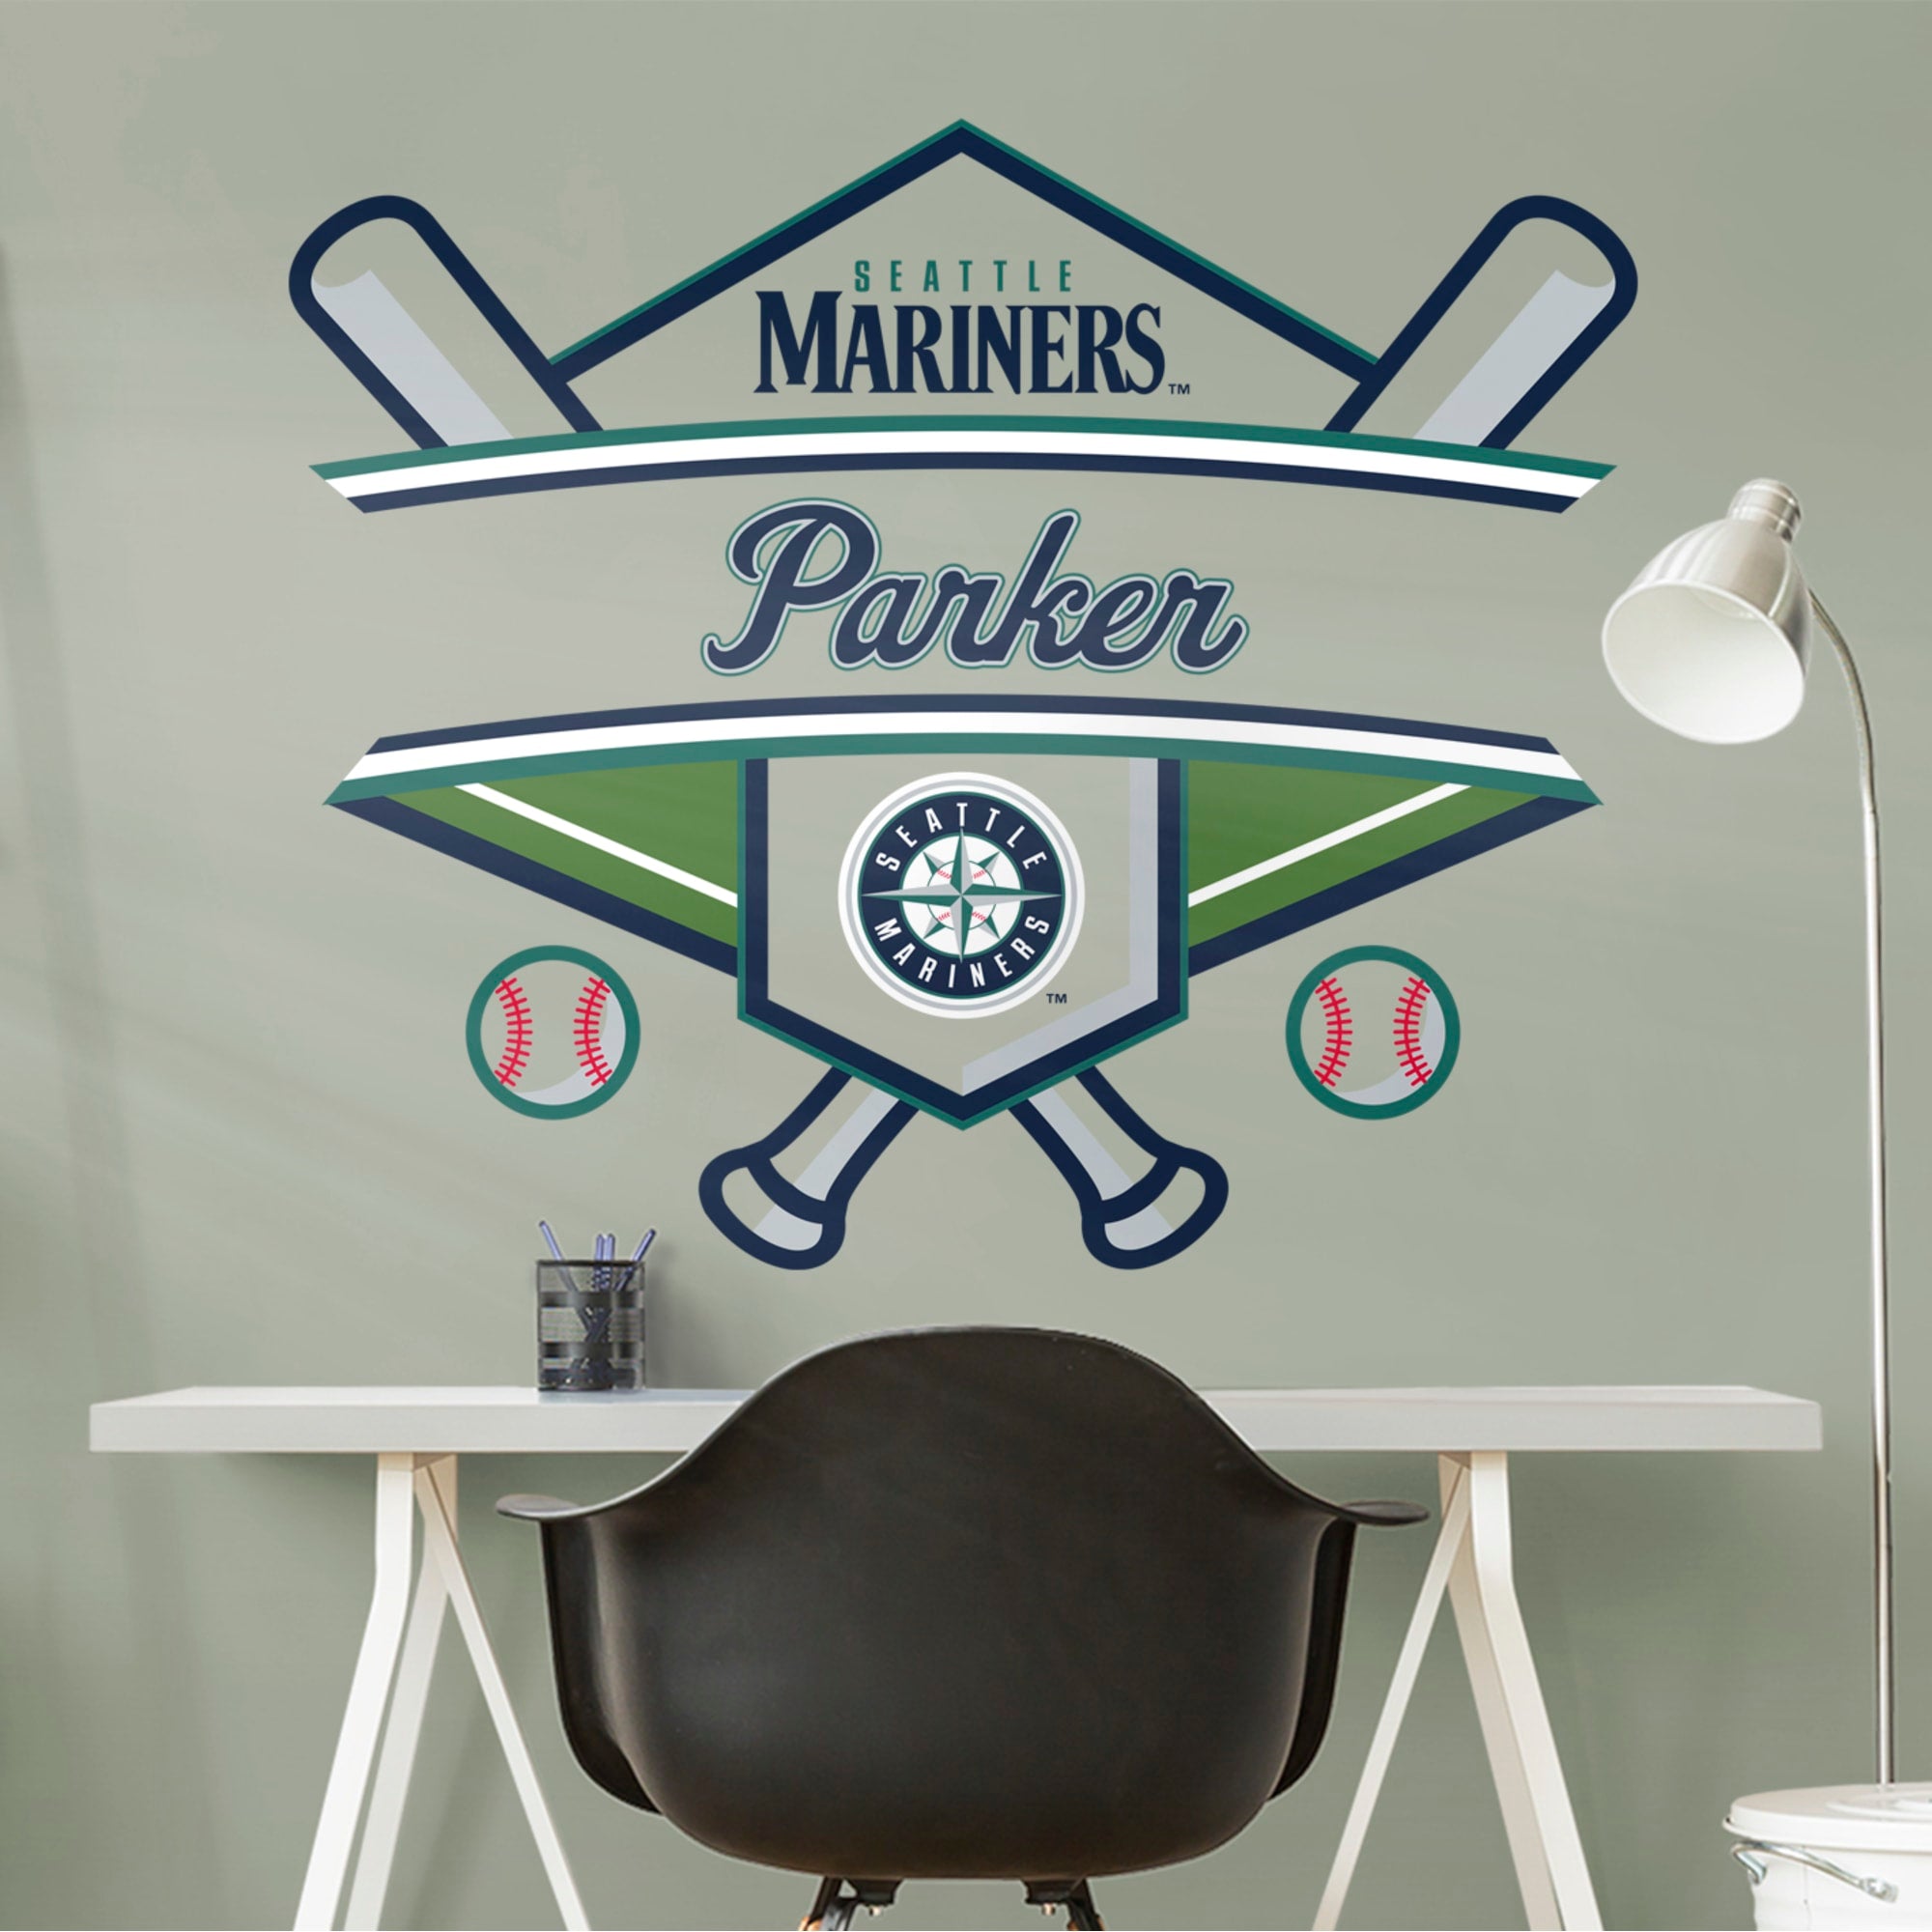 Seattle Mariners: Personalized Name - Officially Licensed MLB Transfer Decal 45.0"W x 39.0"H by Fathead | Vinyl